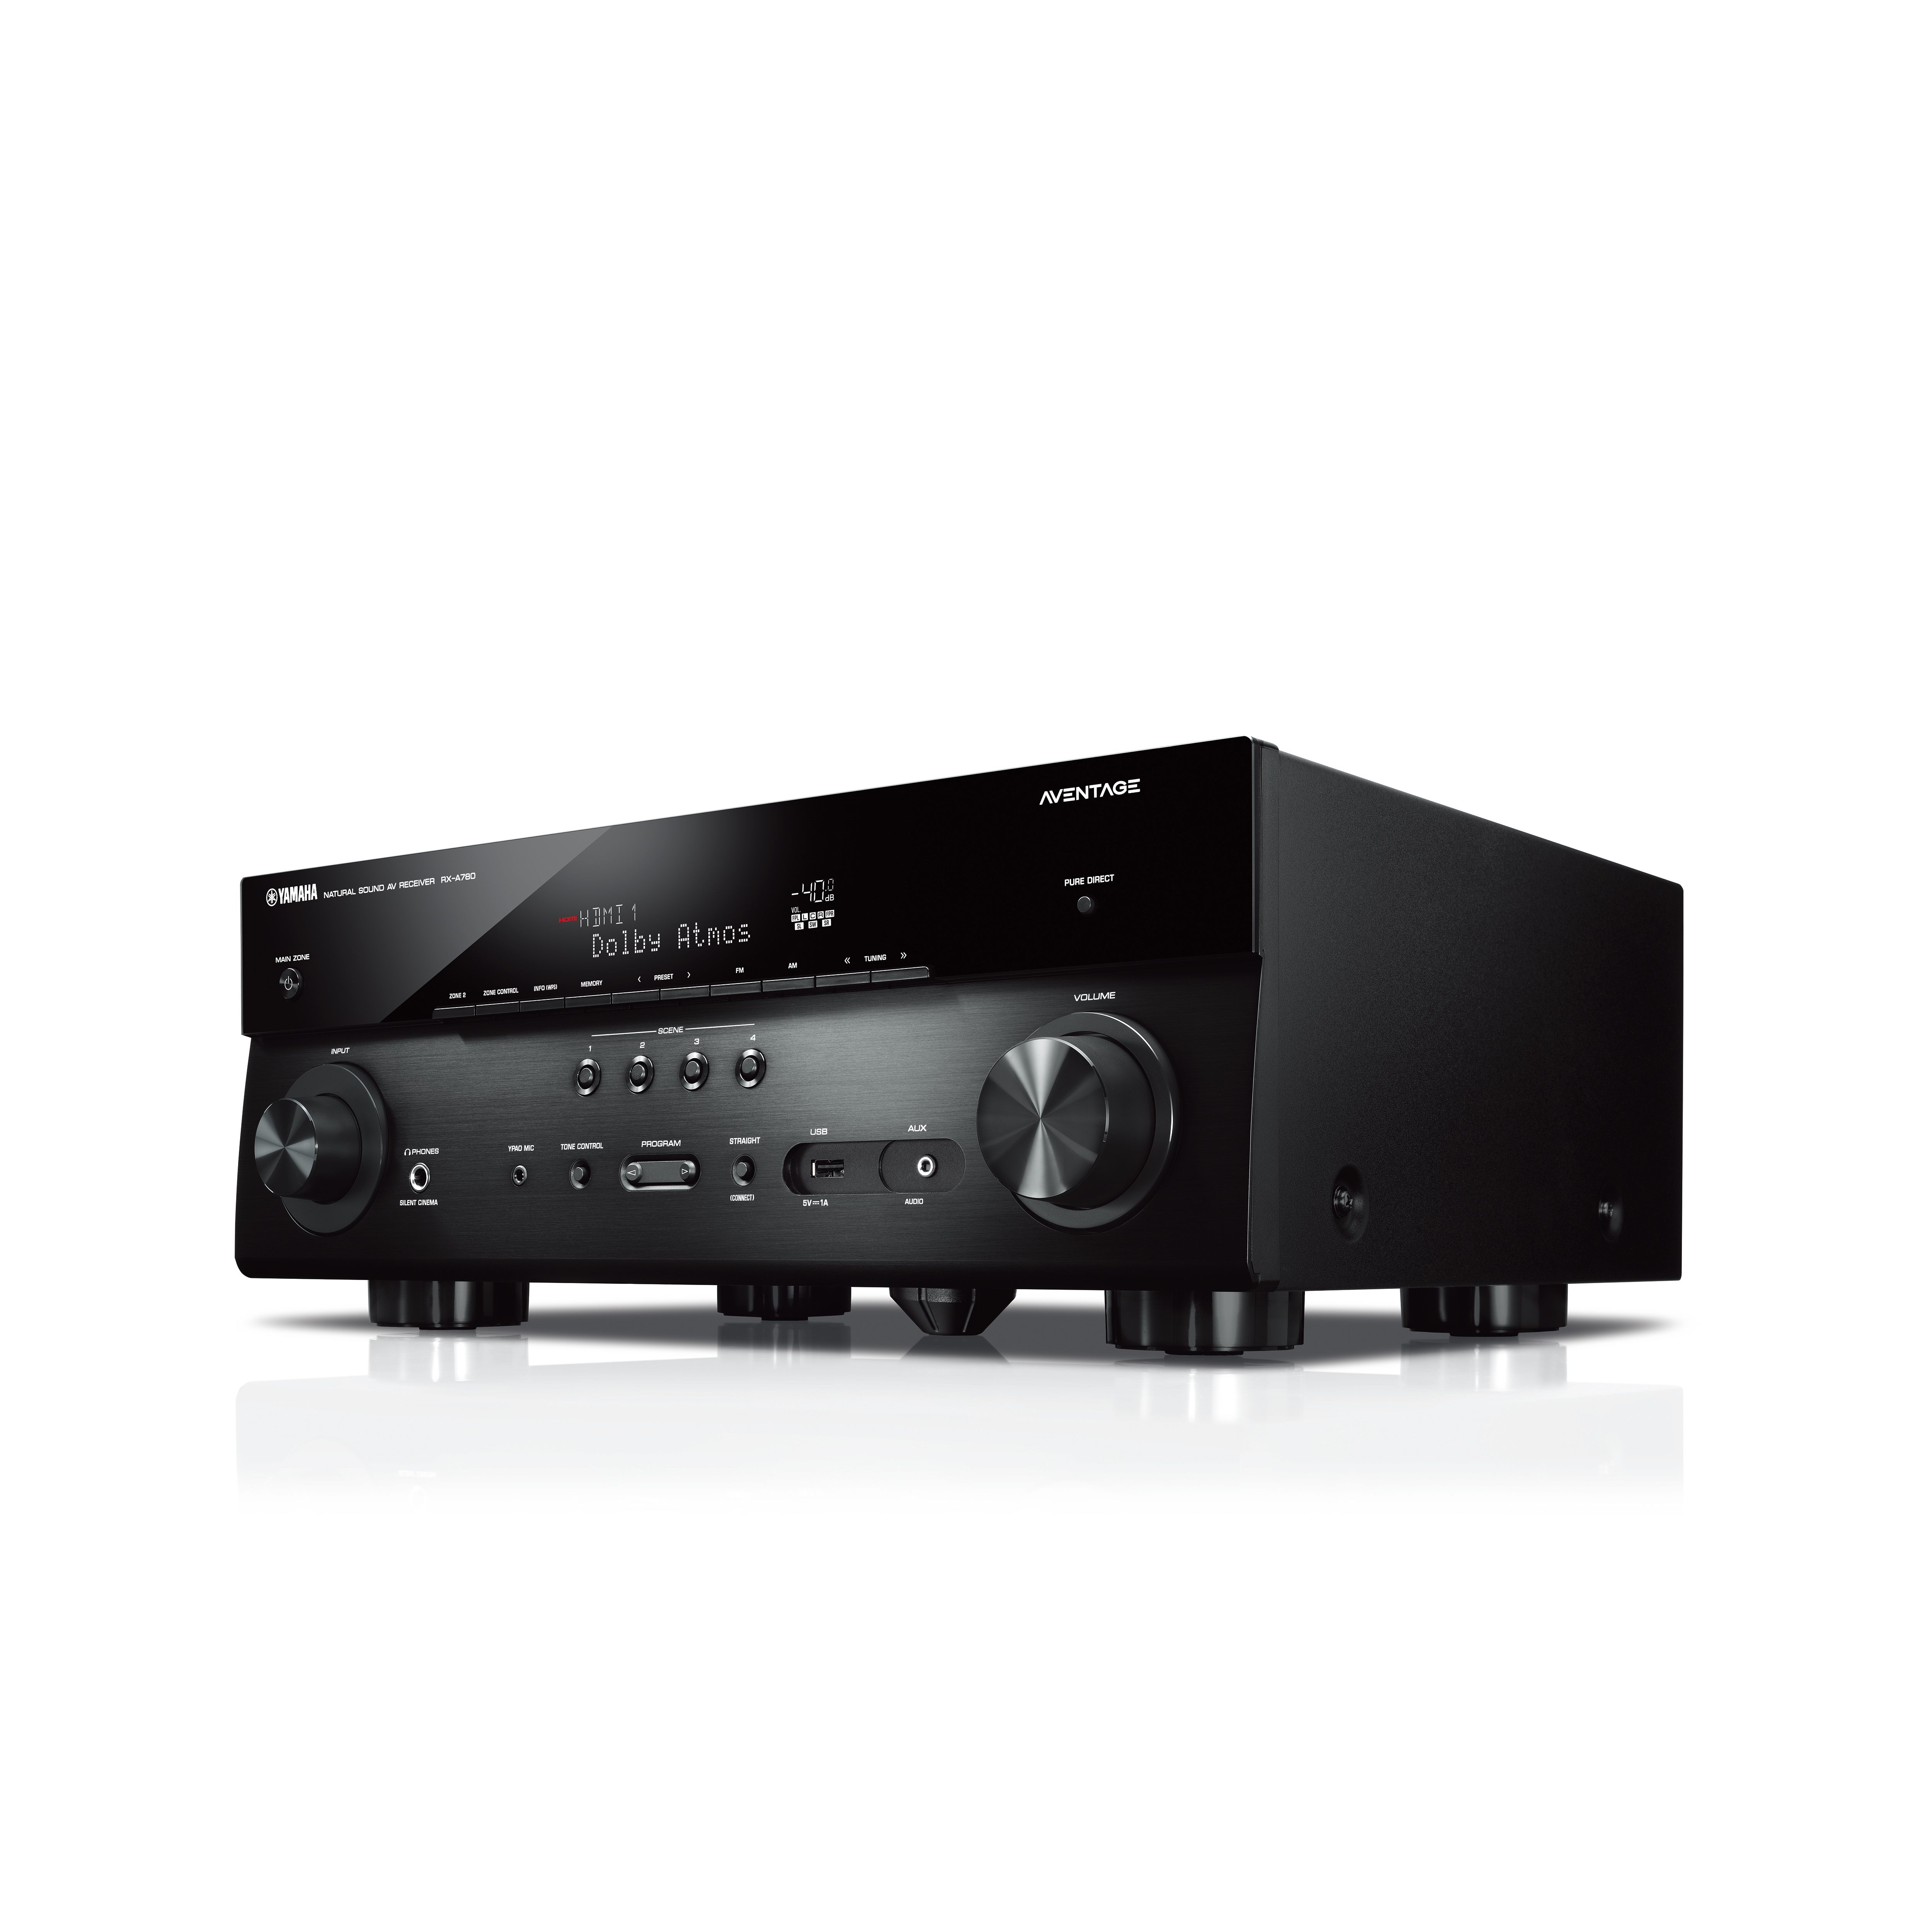 RX-A780 - Overview - AV Receivers - Audio & Visual - Products - Yamaha USA